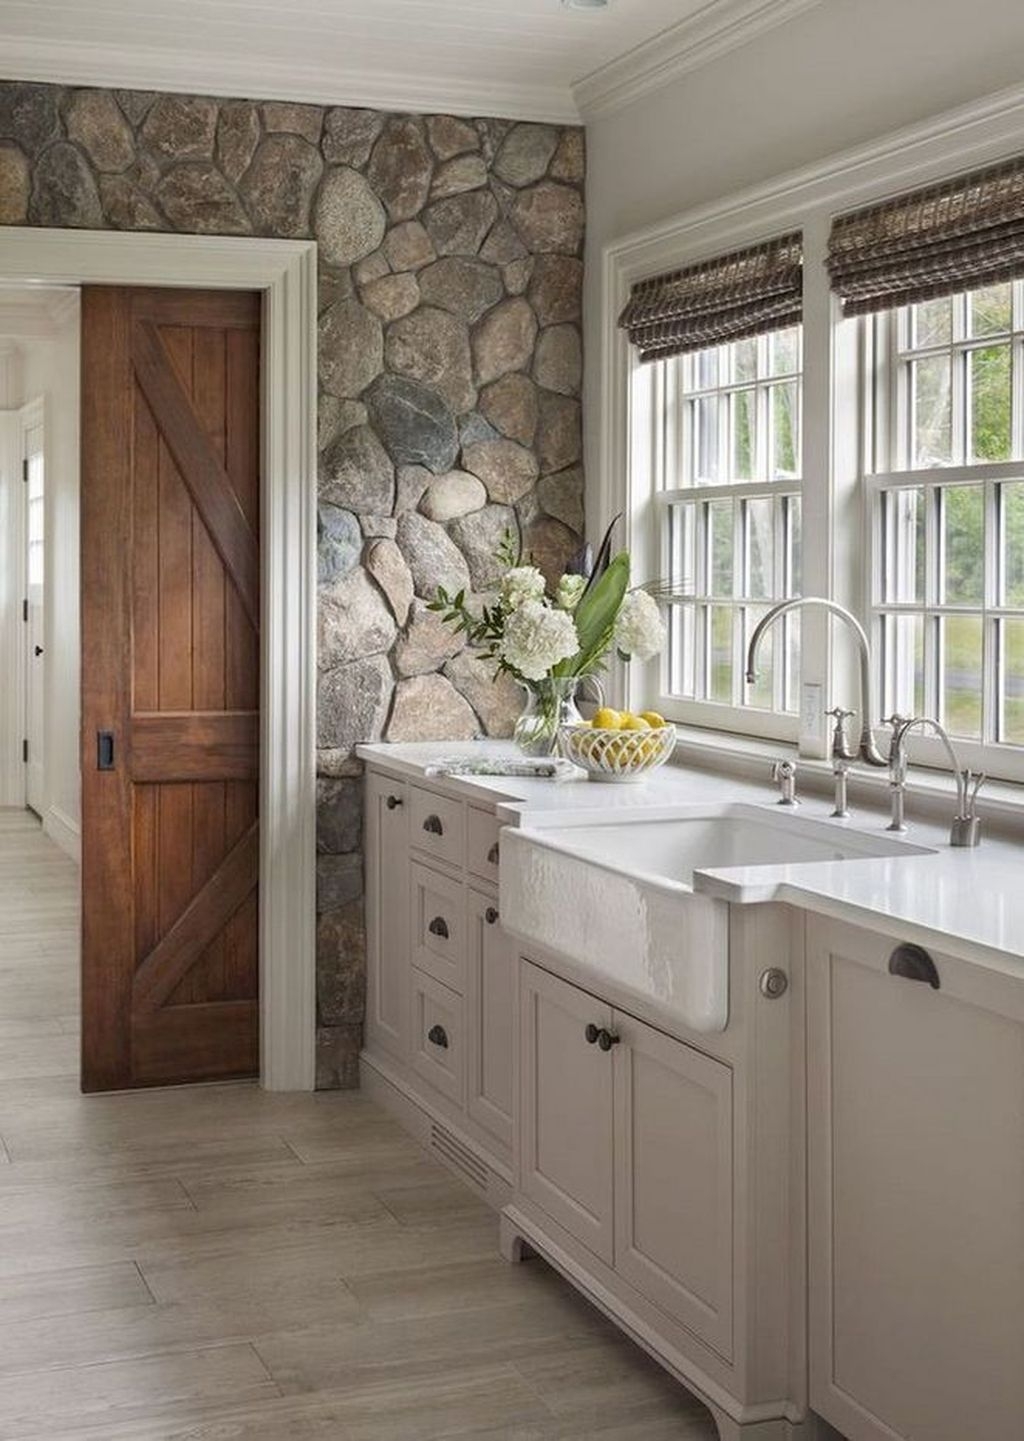 Tales Of Tiles: Cottage Kitchens And Bathrooms Design Ideas